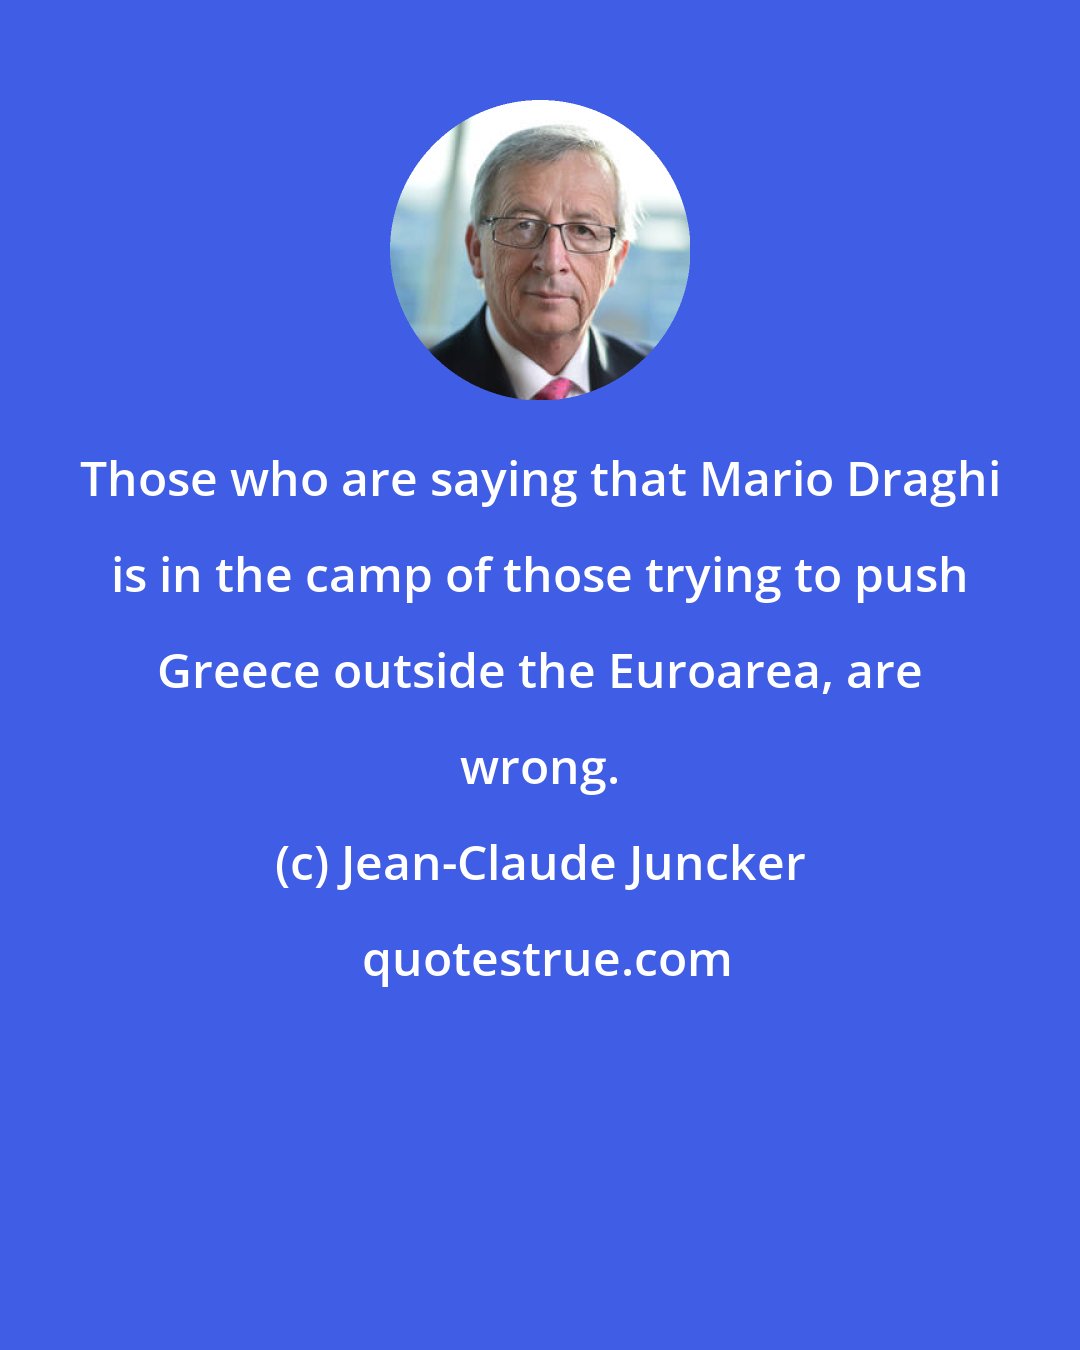 Jean-Claude Juncker: Those who are saying that Mario Draghi is in the camp of those trying to push Greece outside the Euroarea, are wrong.